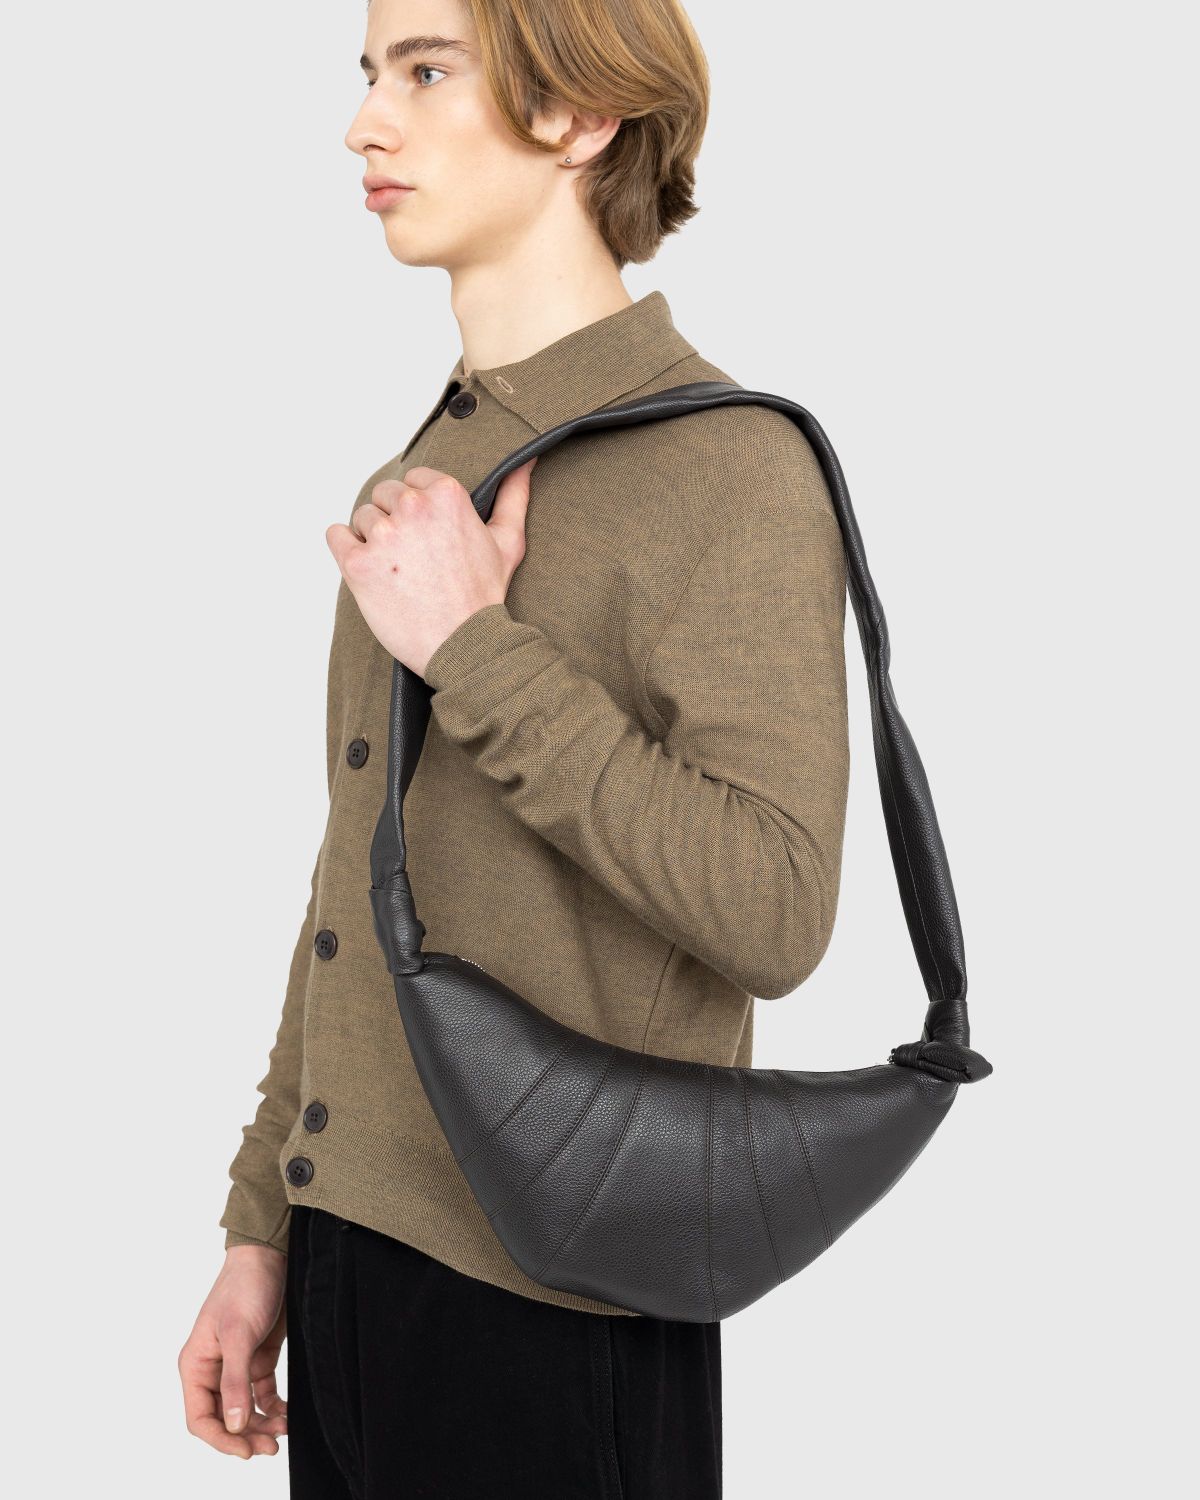 Dark Chocolate Medium Croissant Bag in Soft Nappa Leather | LEMAIRE